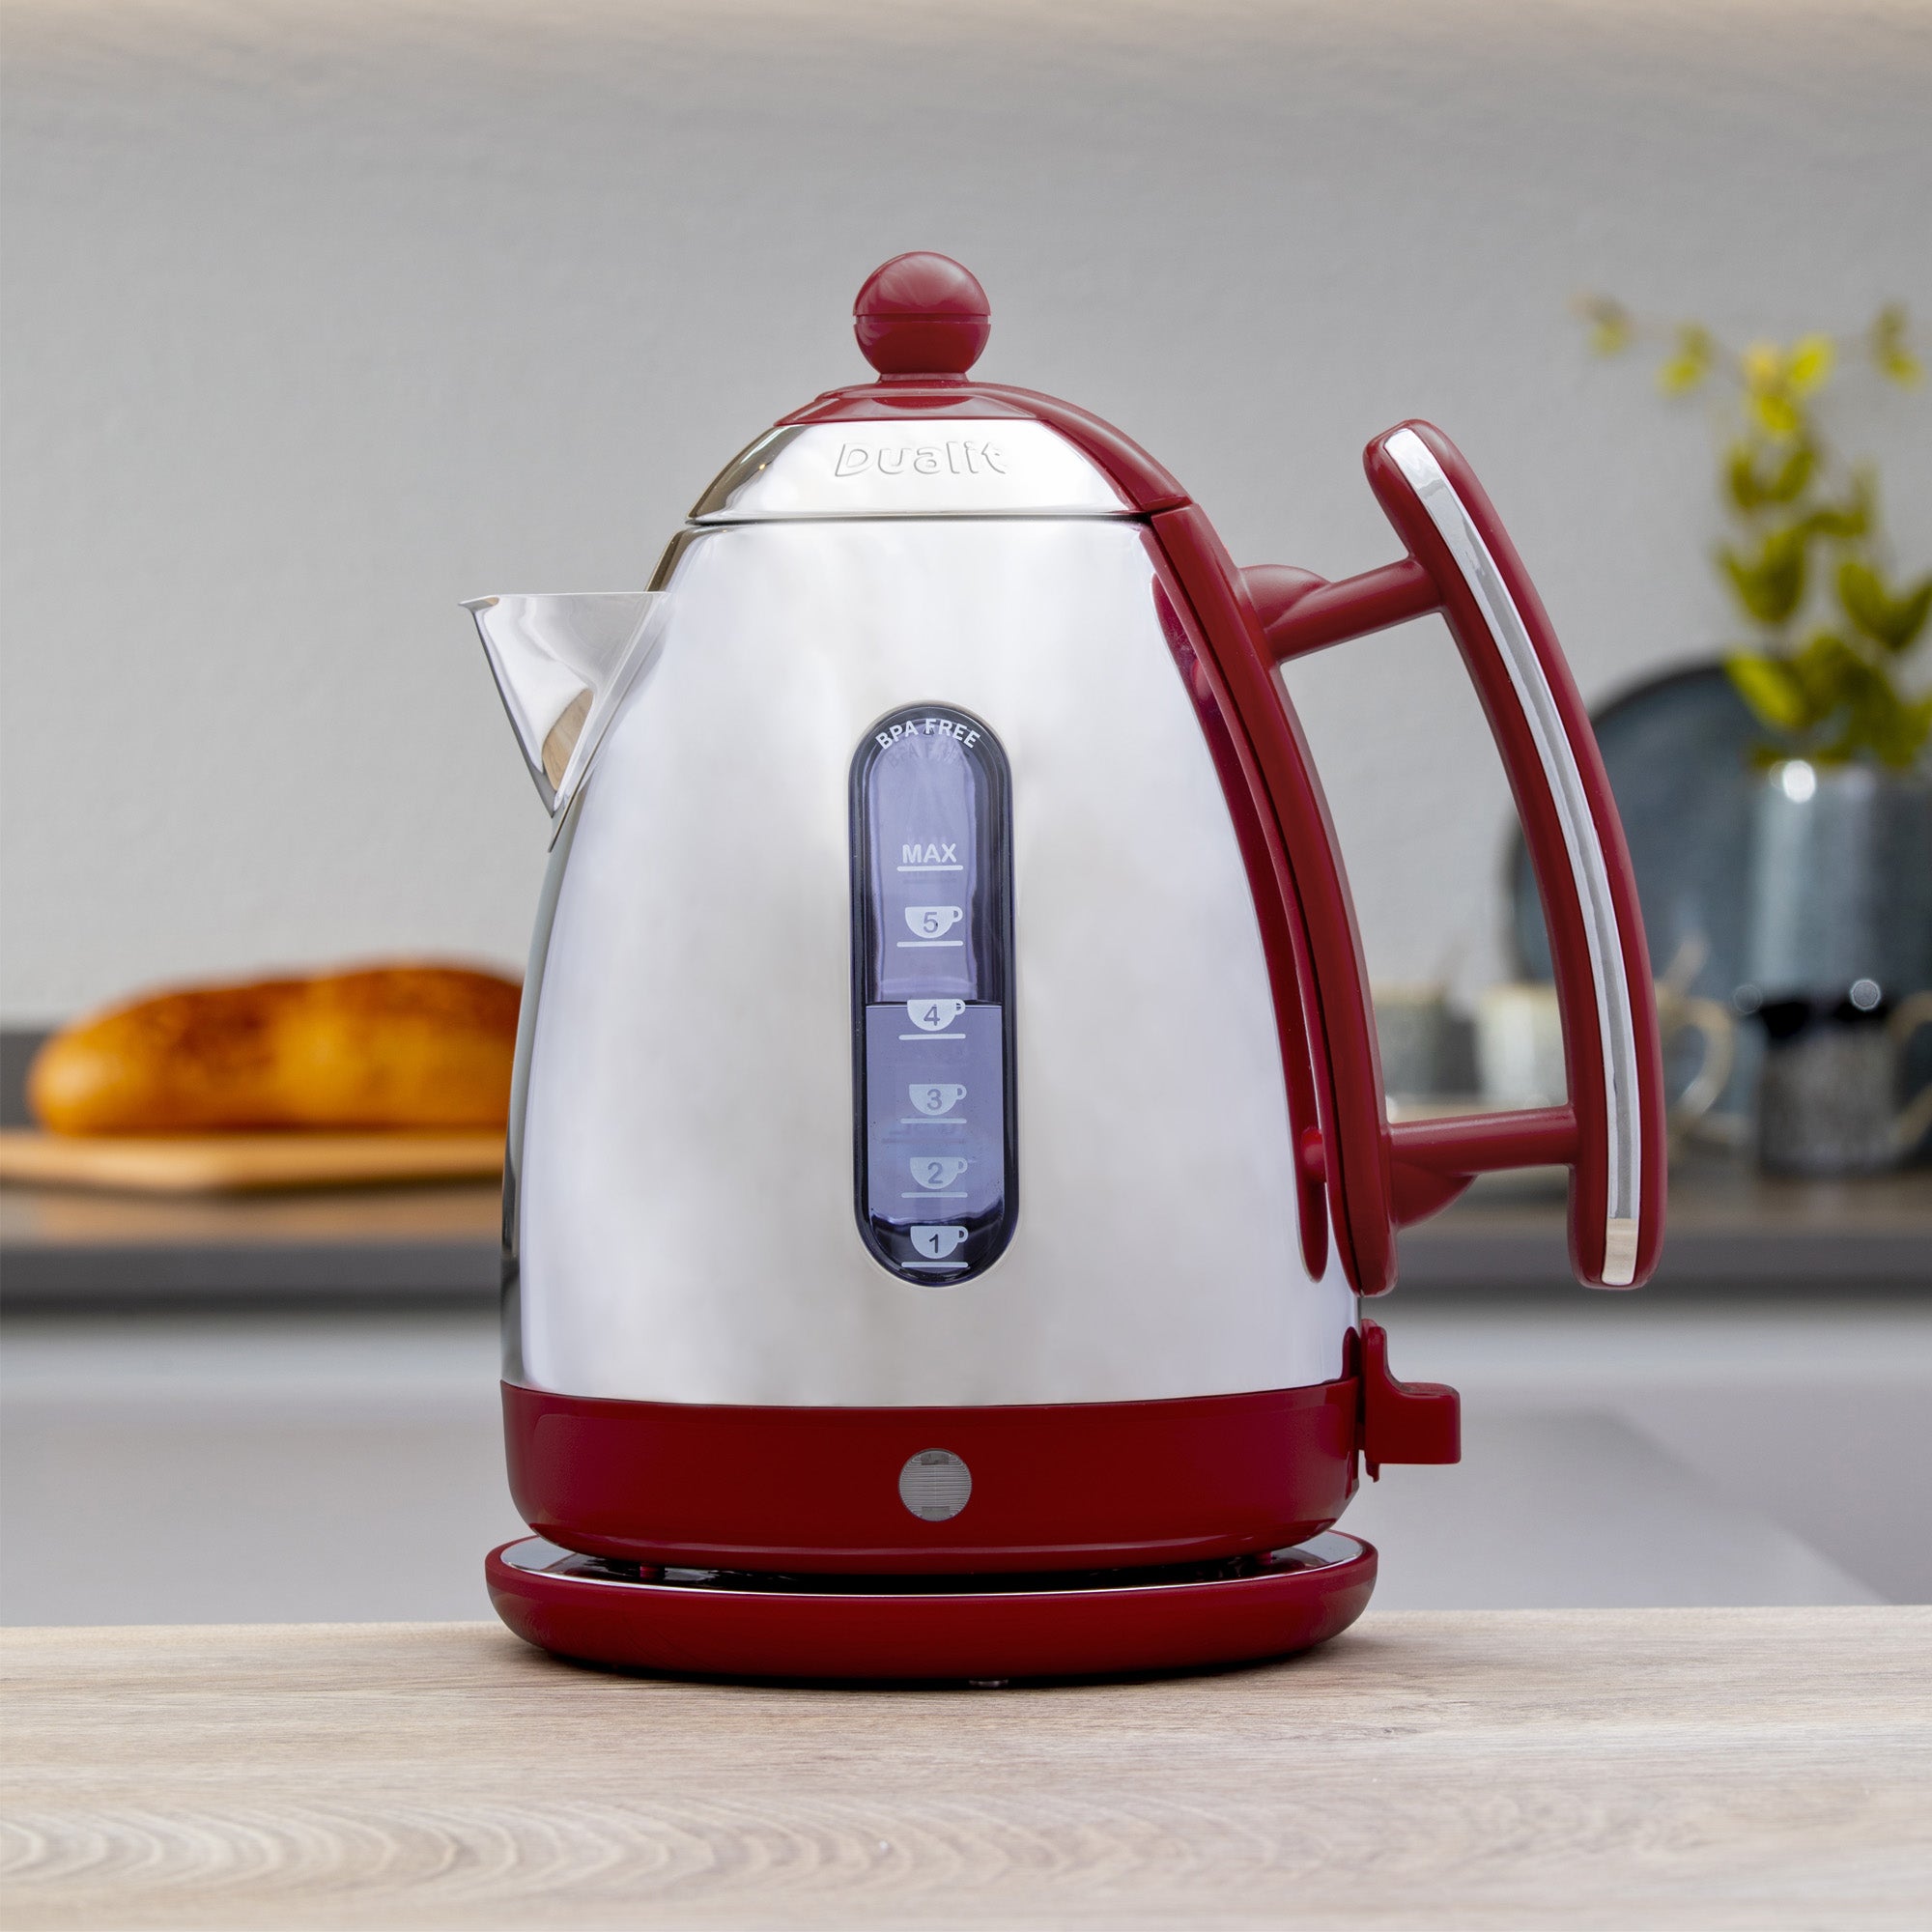 Dualit Lite 1.5L Kettle Red